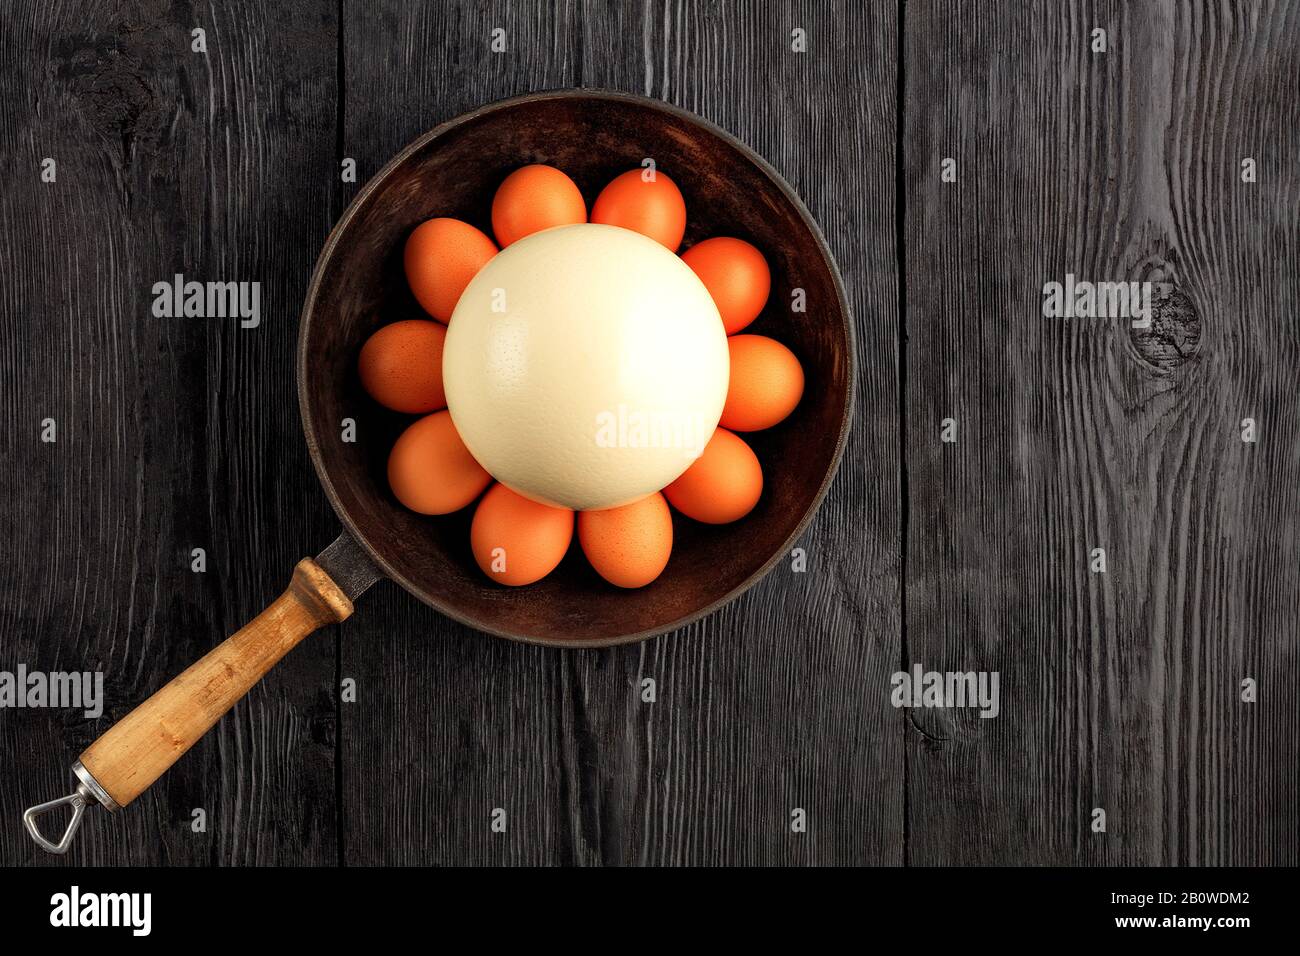 Ostrich egg surrounded by chicken eggs in an old cast-iron skillet, which is standing on an old black wooden surface, top view, copy space. Stock Photo